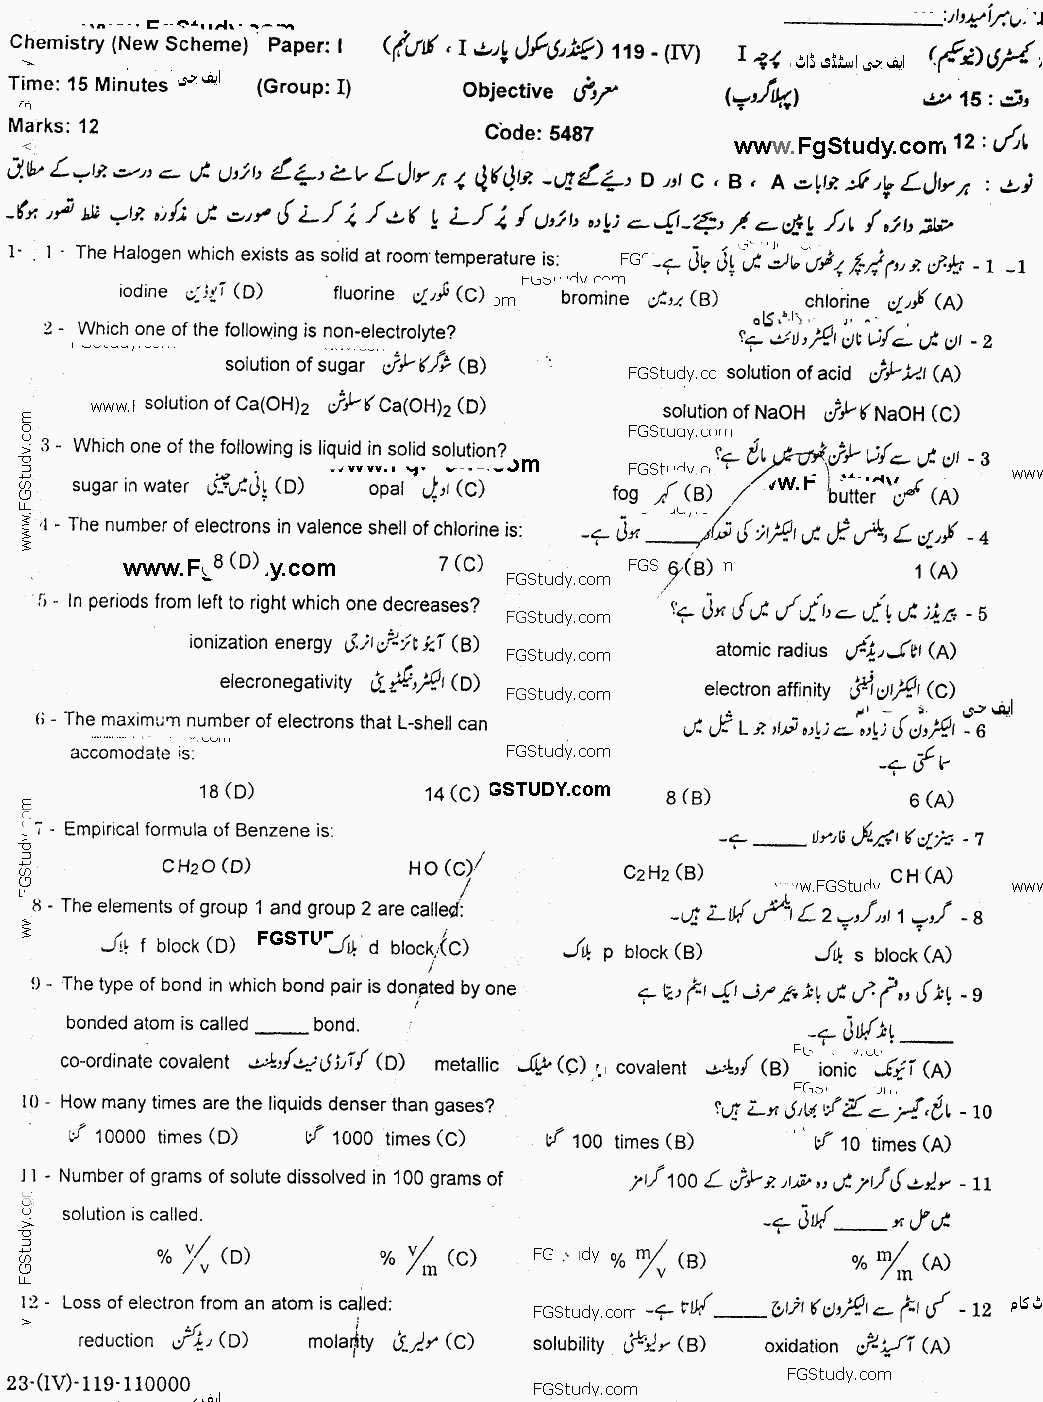 Gujranwala Board Chemistry Objective Group 1 9th Class Past Papers 2019